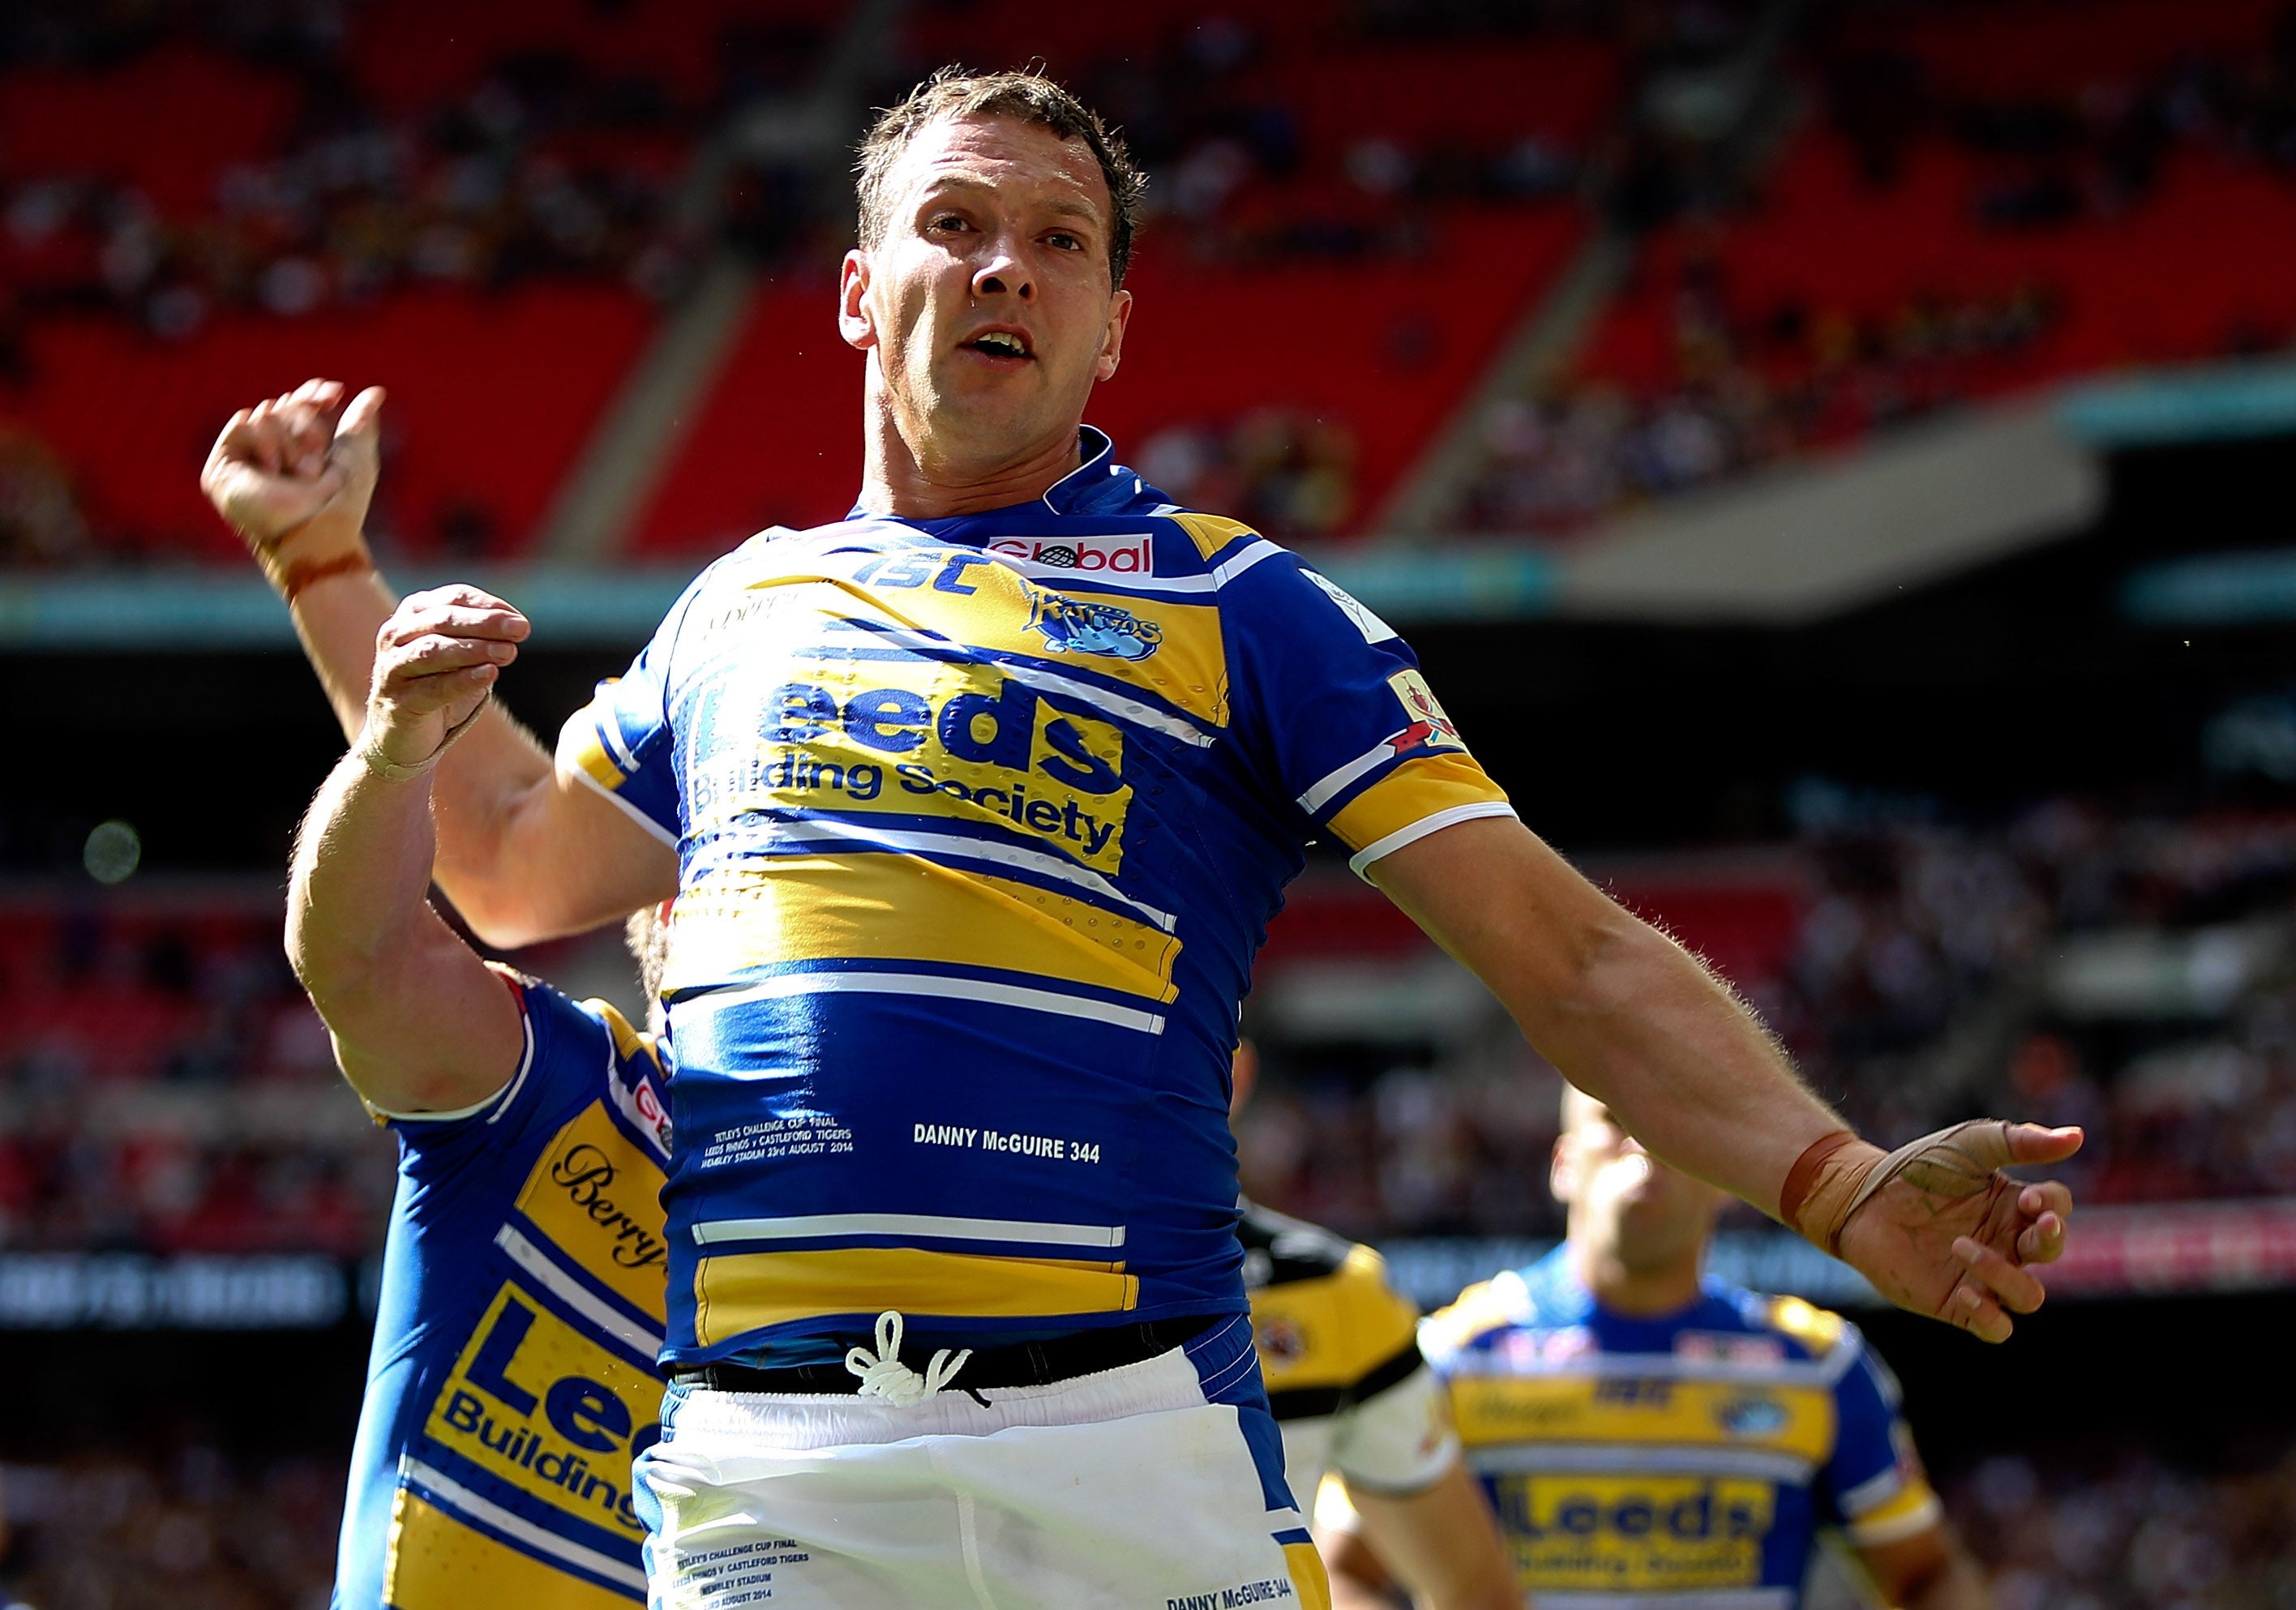 Danny McGuire celebrates after scoring a try during the Tetley's Challenge Cup Final between Leeds Rhinos and Castleford Tigers